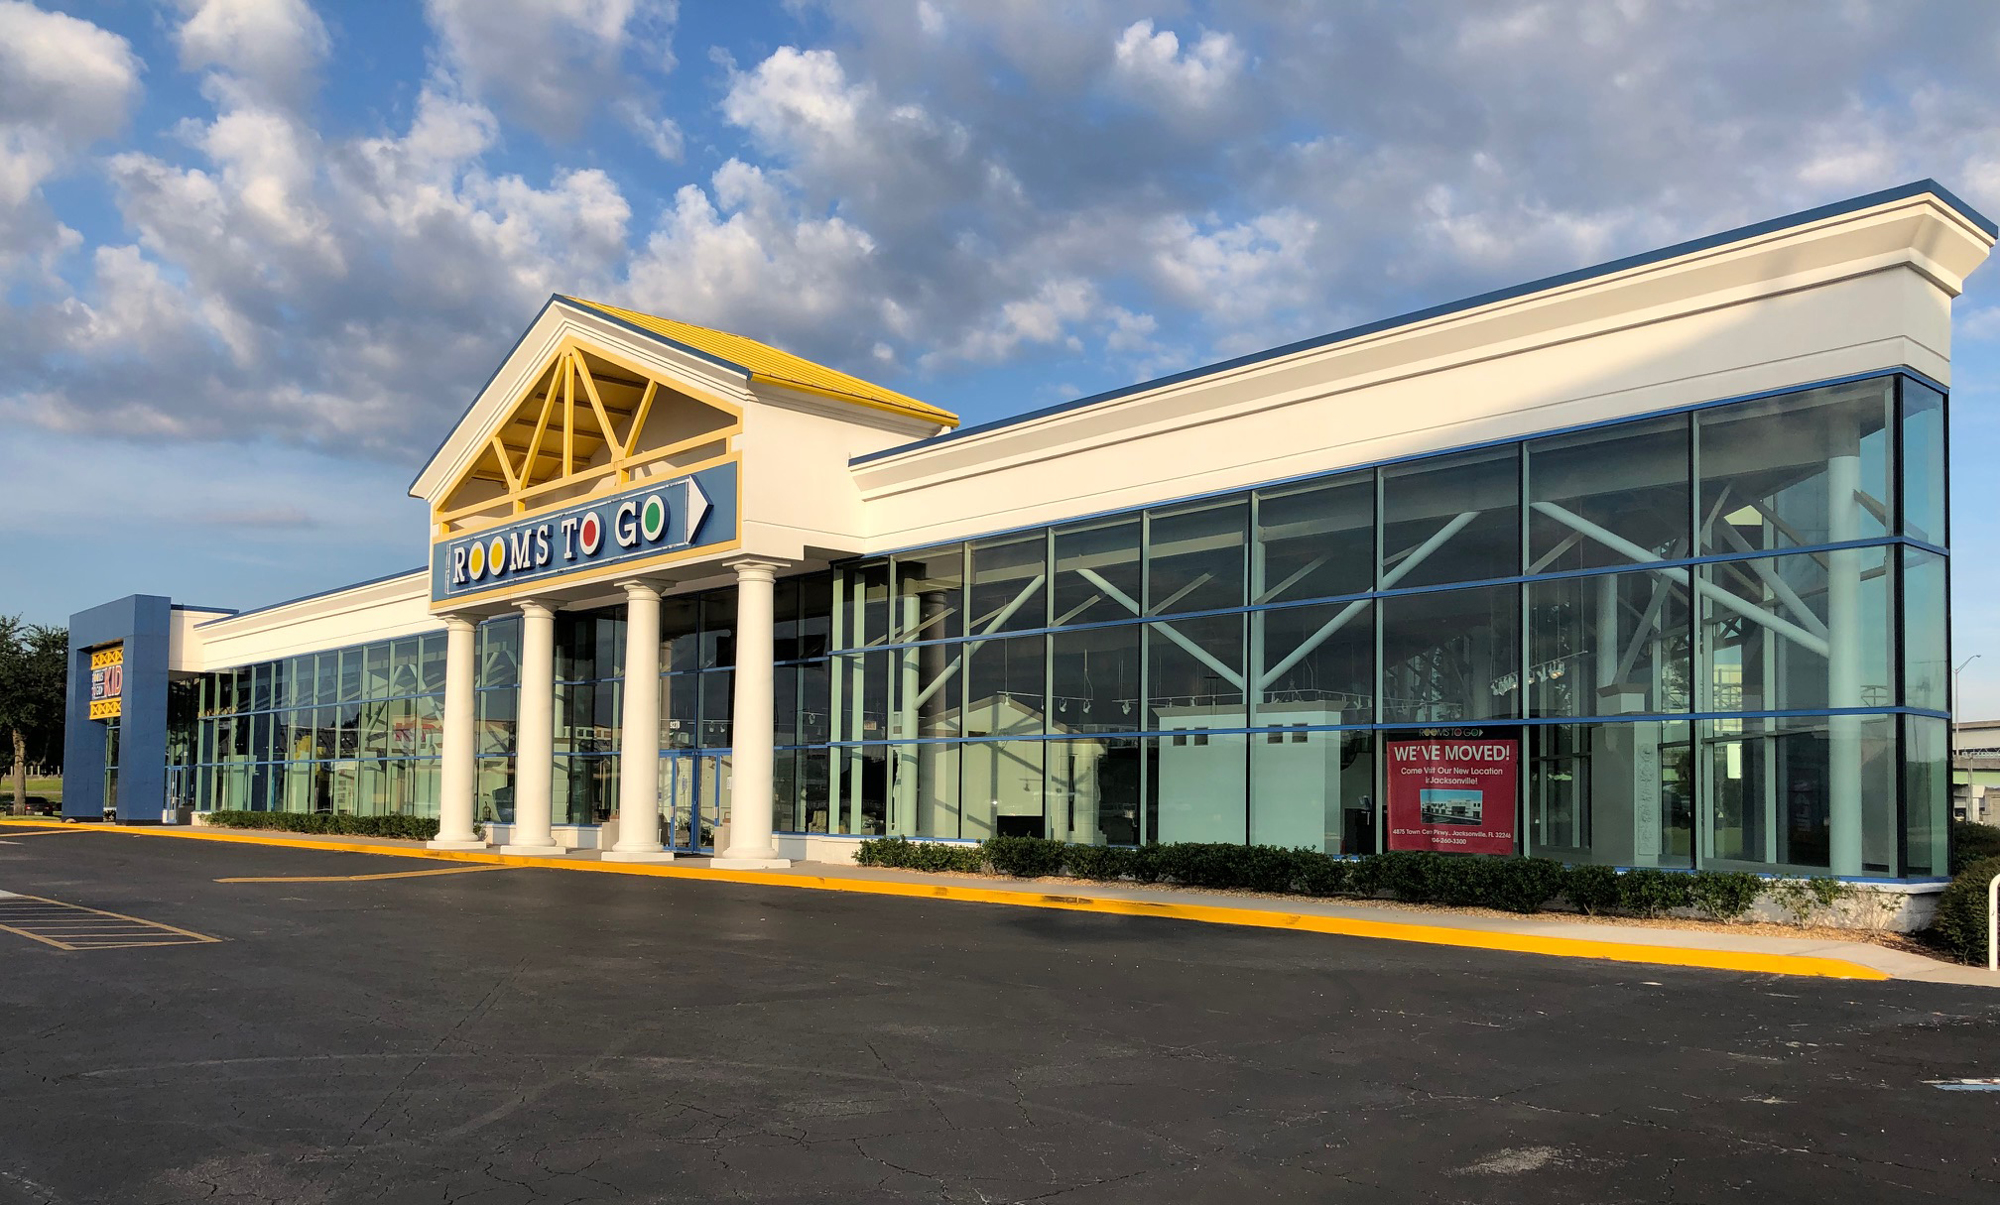 Property records show the roughly 30,000-square-foot Regency area store was built in 1998.